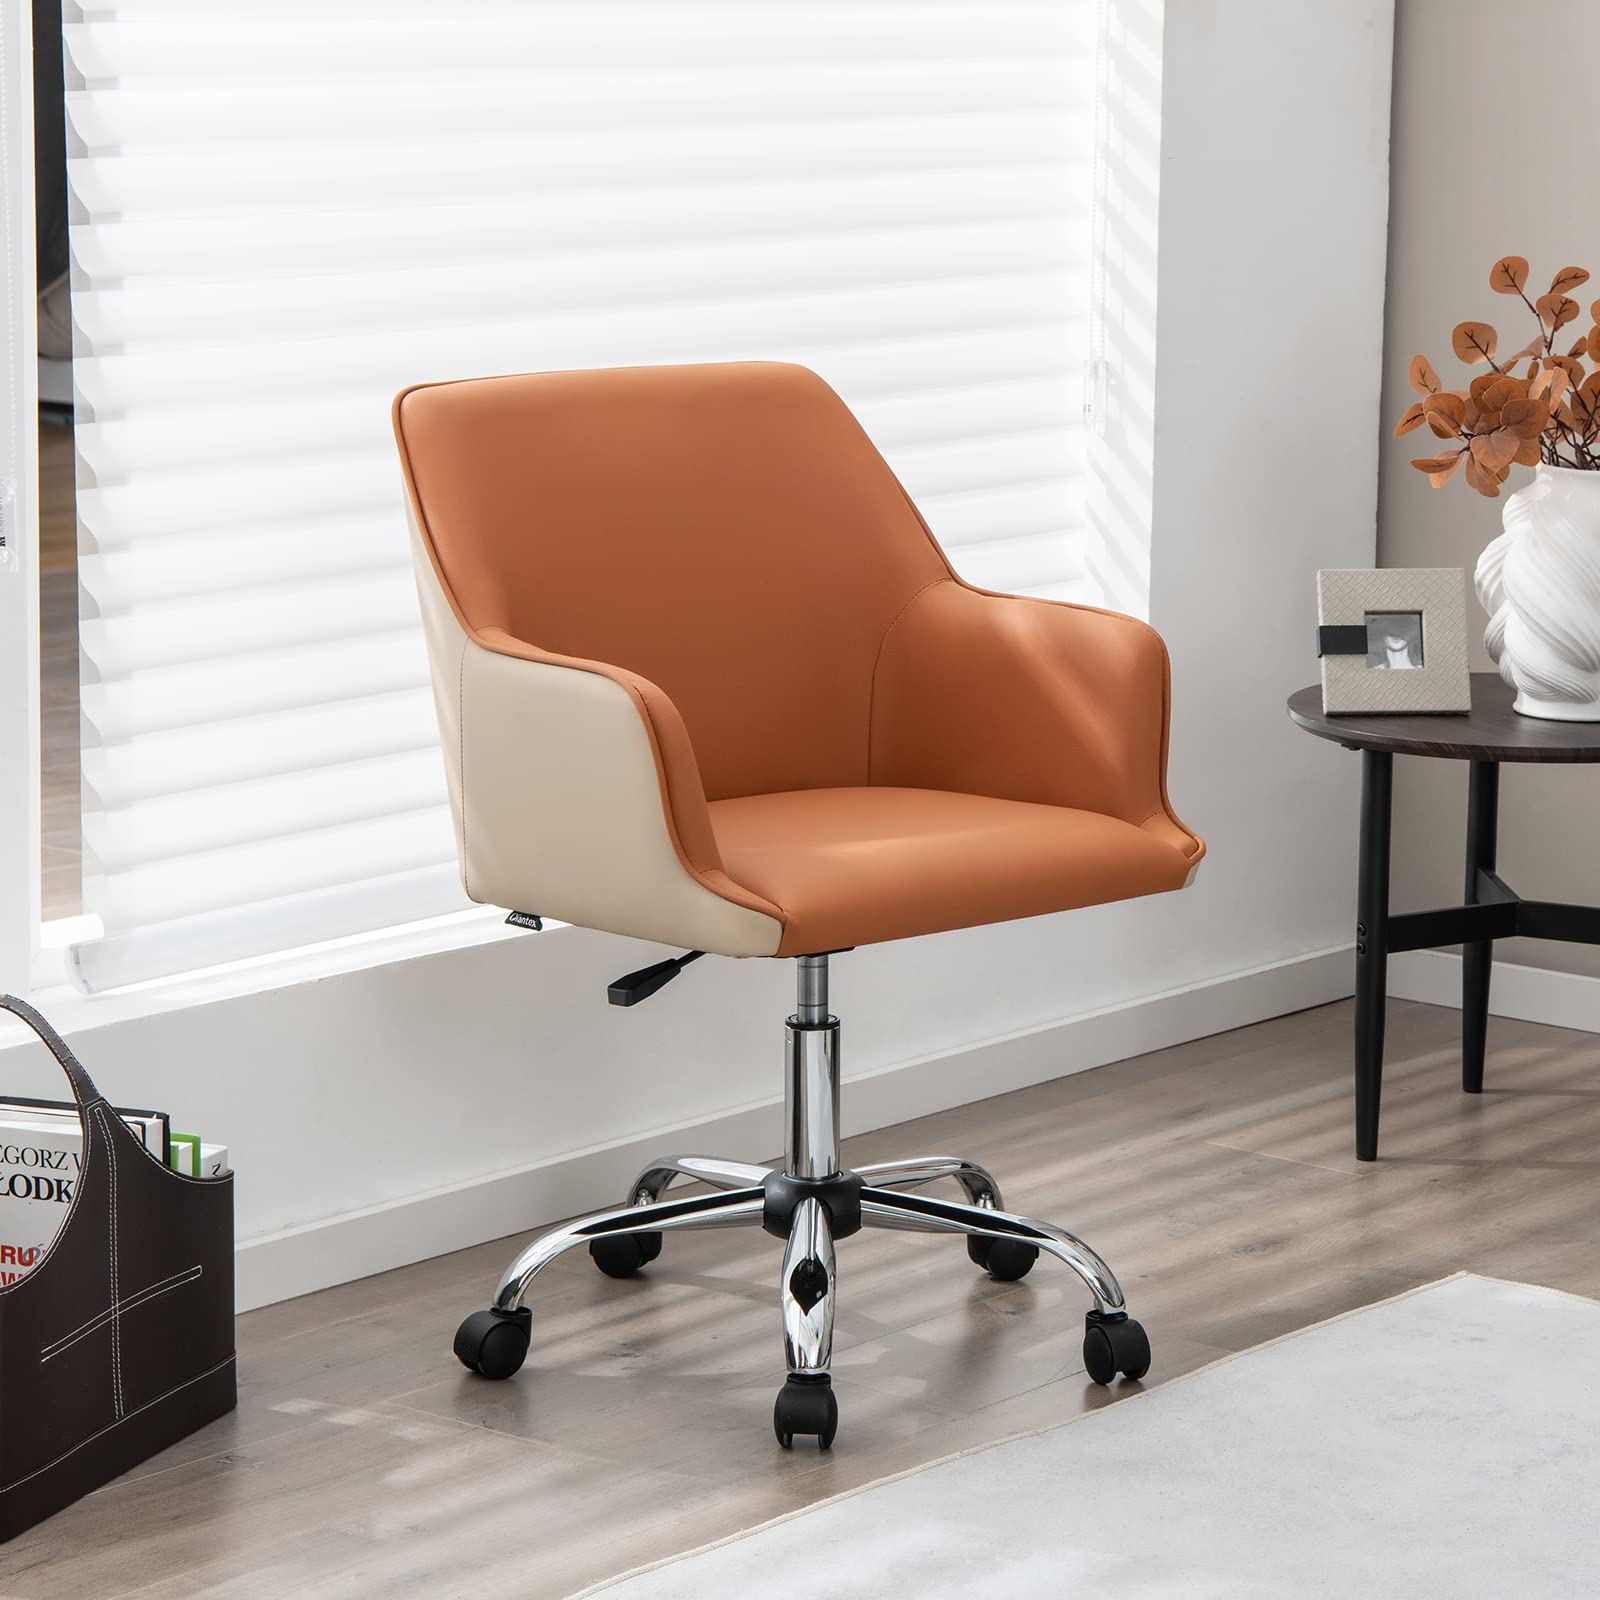 Giantex Home Office Desk Chair, Upholstered PU Leather Task Chair, Orange & Beige